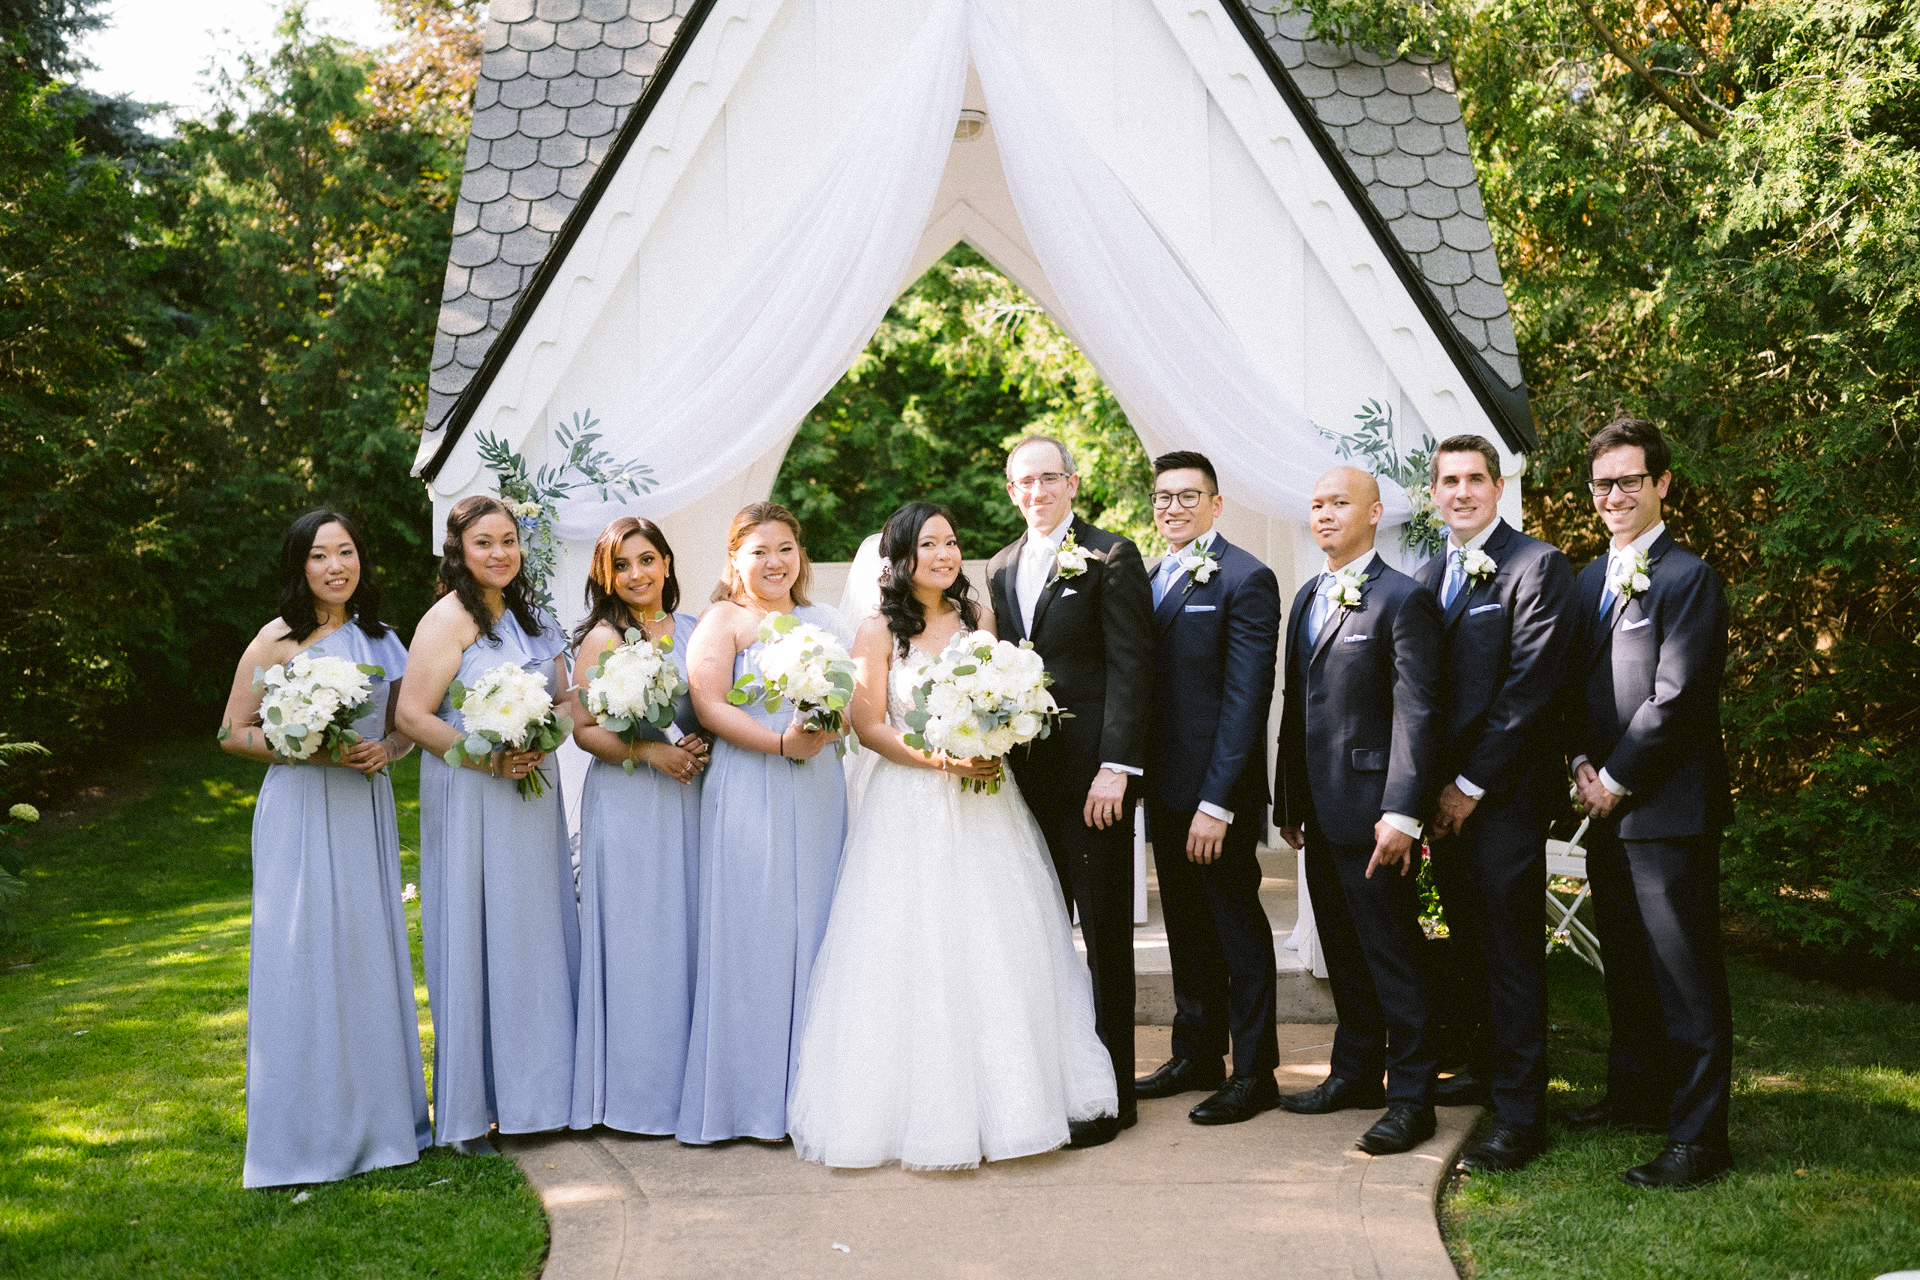 A bridal party posing for a photograph at an outdoor wedding ceremony.